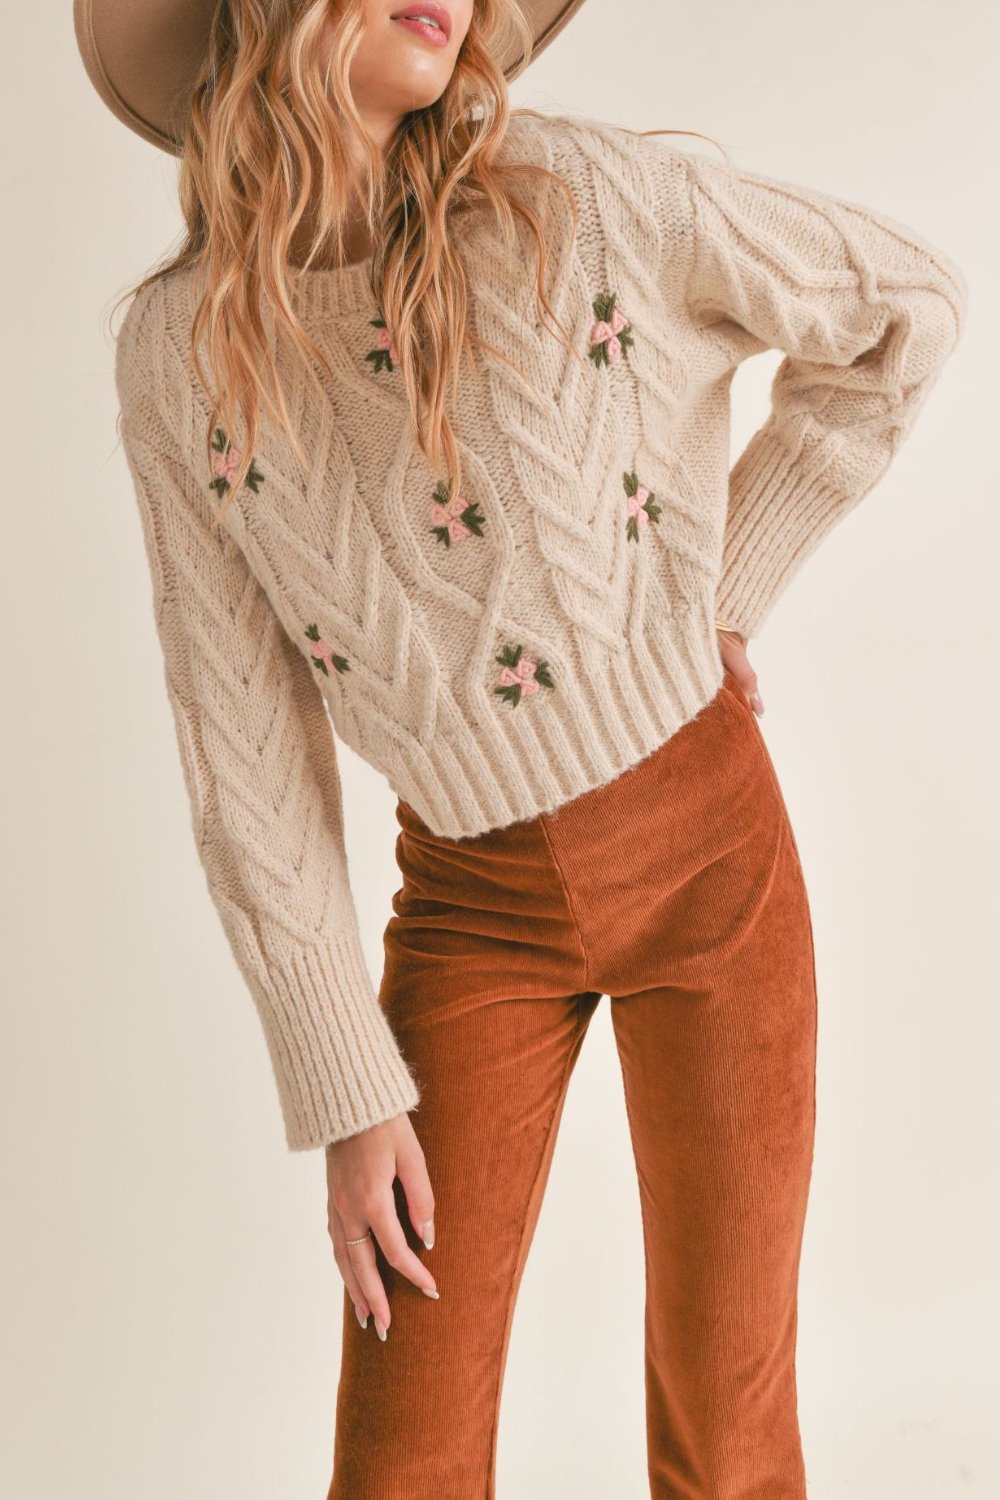 Women's Parisian Style Floral Knit Sweater Top | Beige - Women's Sweaters - Blooming Daily